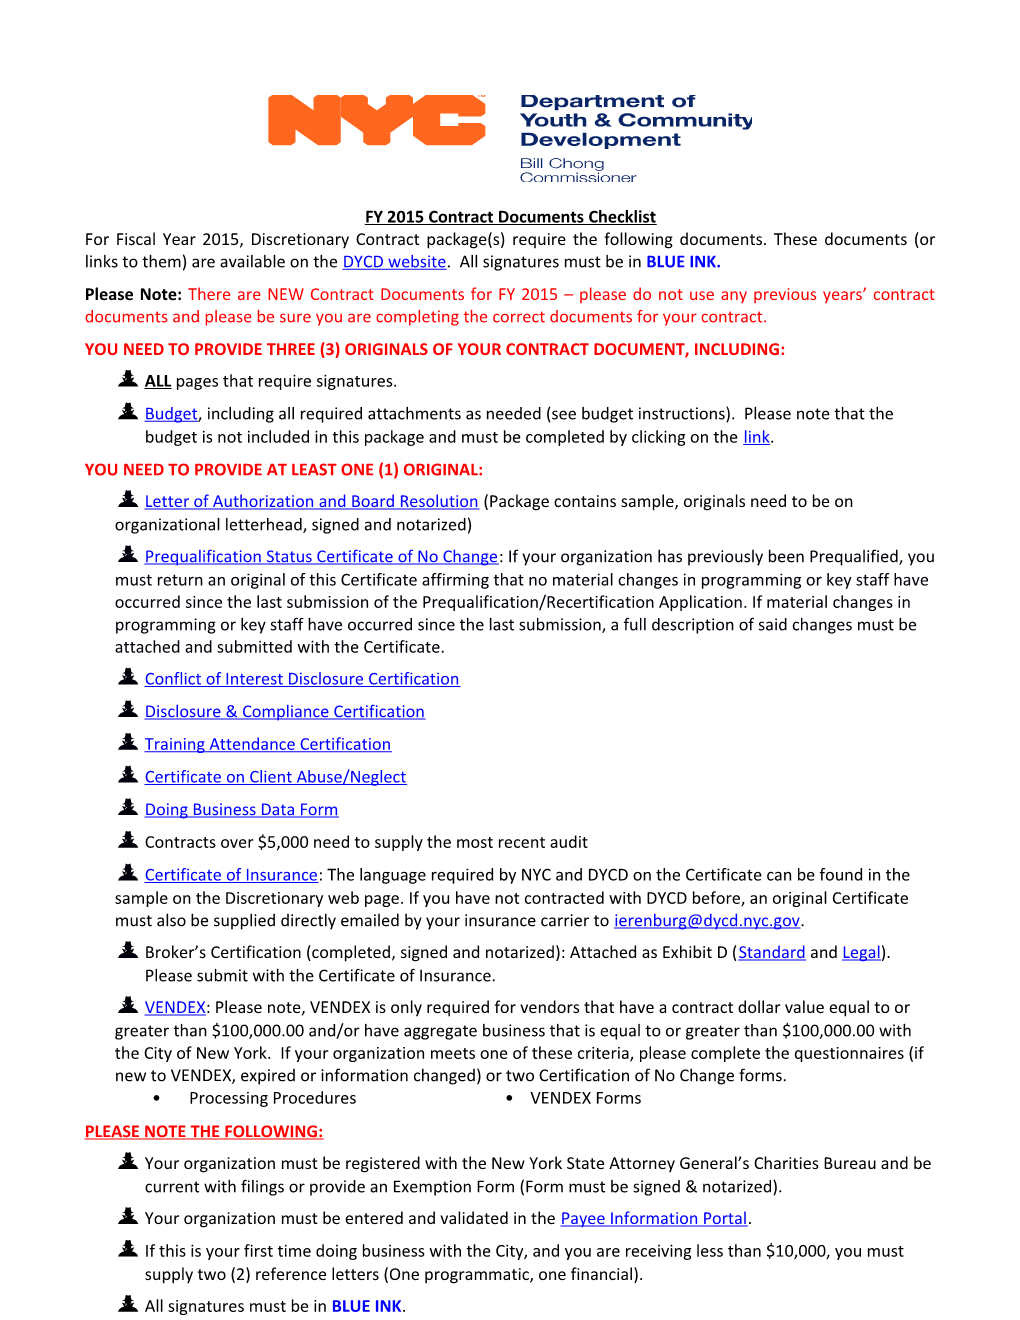 FY 2015 Contract Documents Checklist